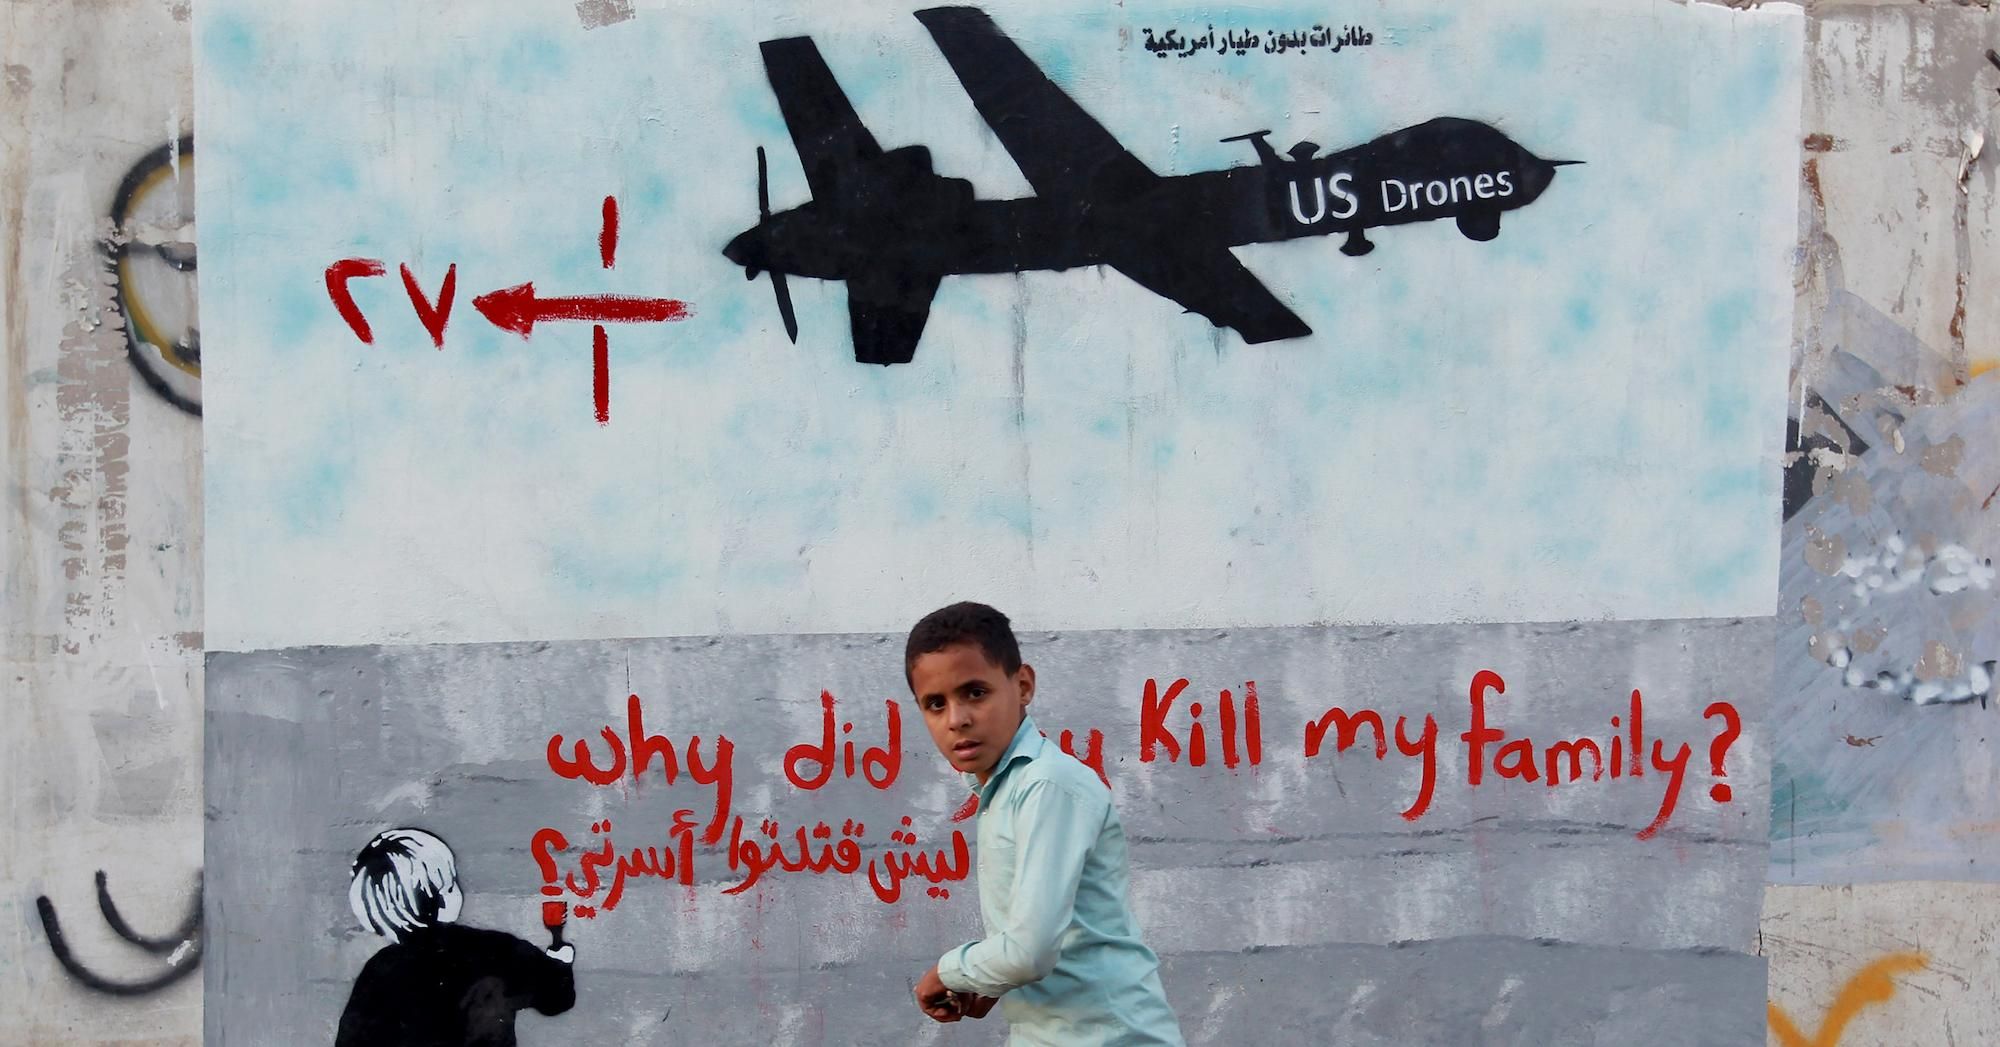 A Yemeni boy (C) walks past a mural depicting a U.S. drone and reading " Why did you kill my family?" on December 13, 2013 in the capital Sanaa.